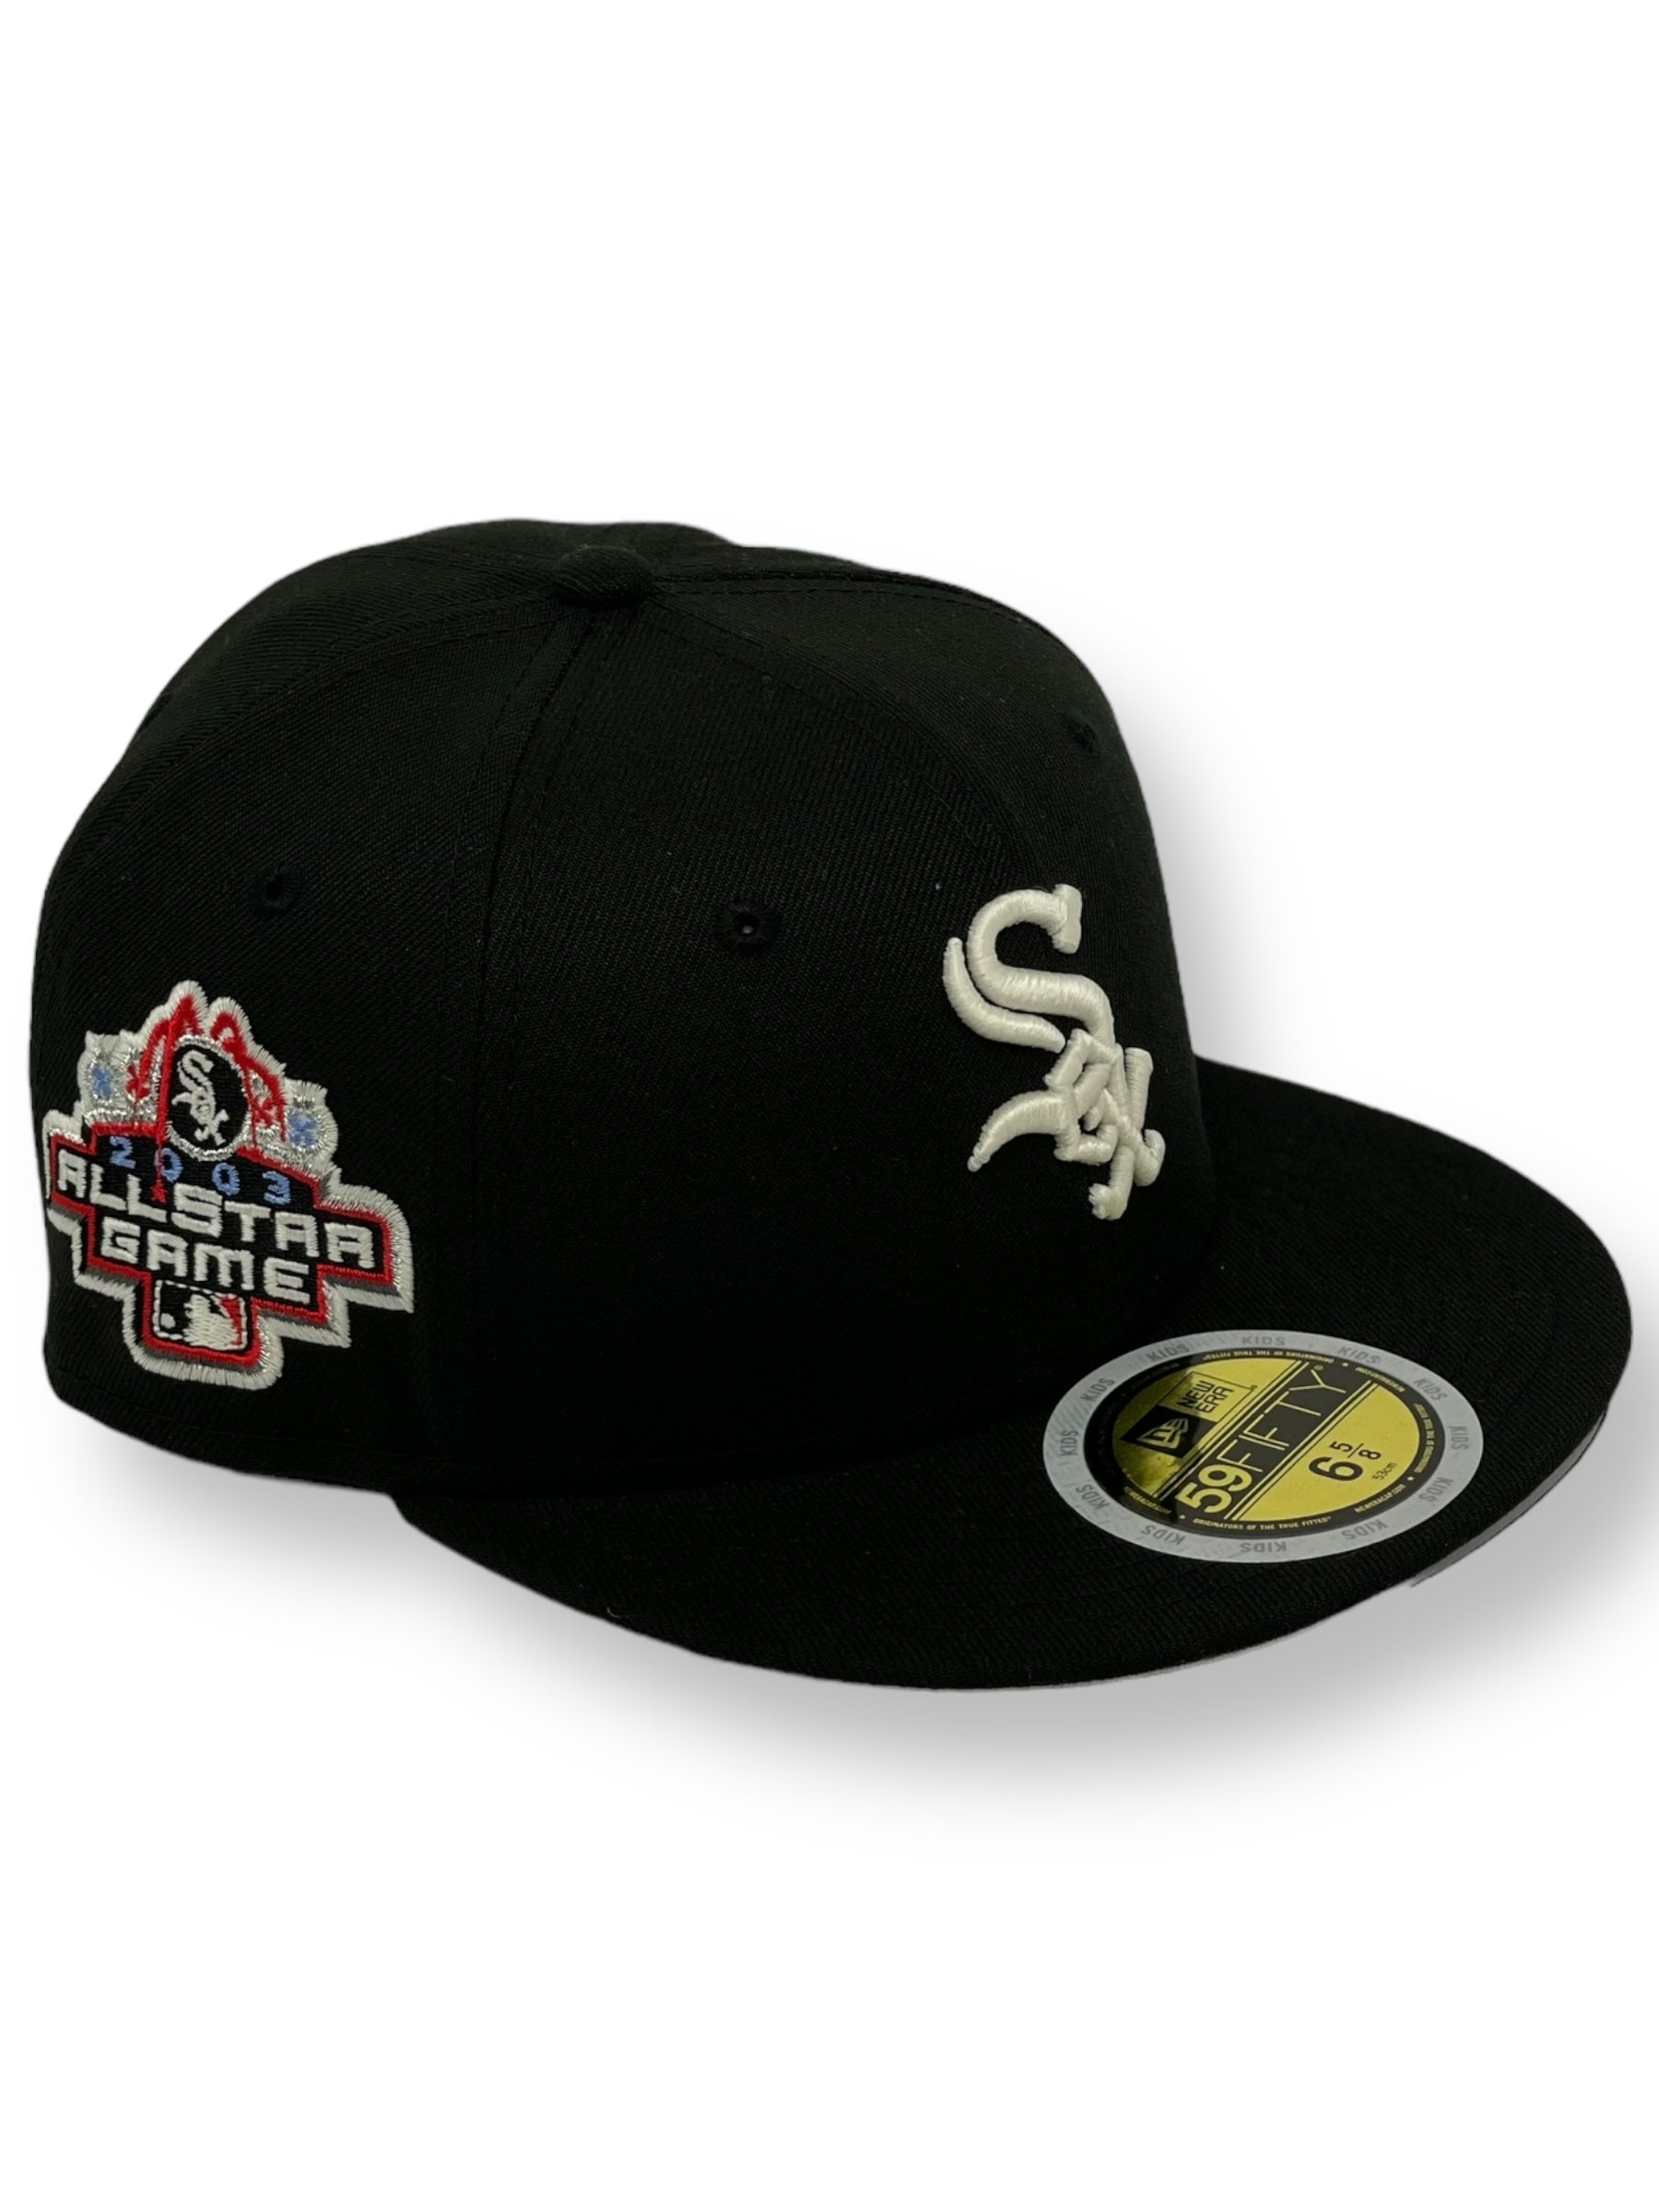 "KIDS" CHICAGO WHITESOX(BLACK)( 2003 ASG) NEW ERA 59FIFTY FITTED